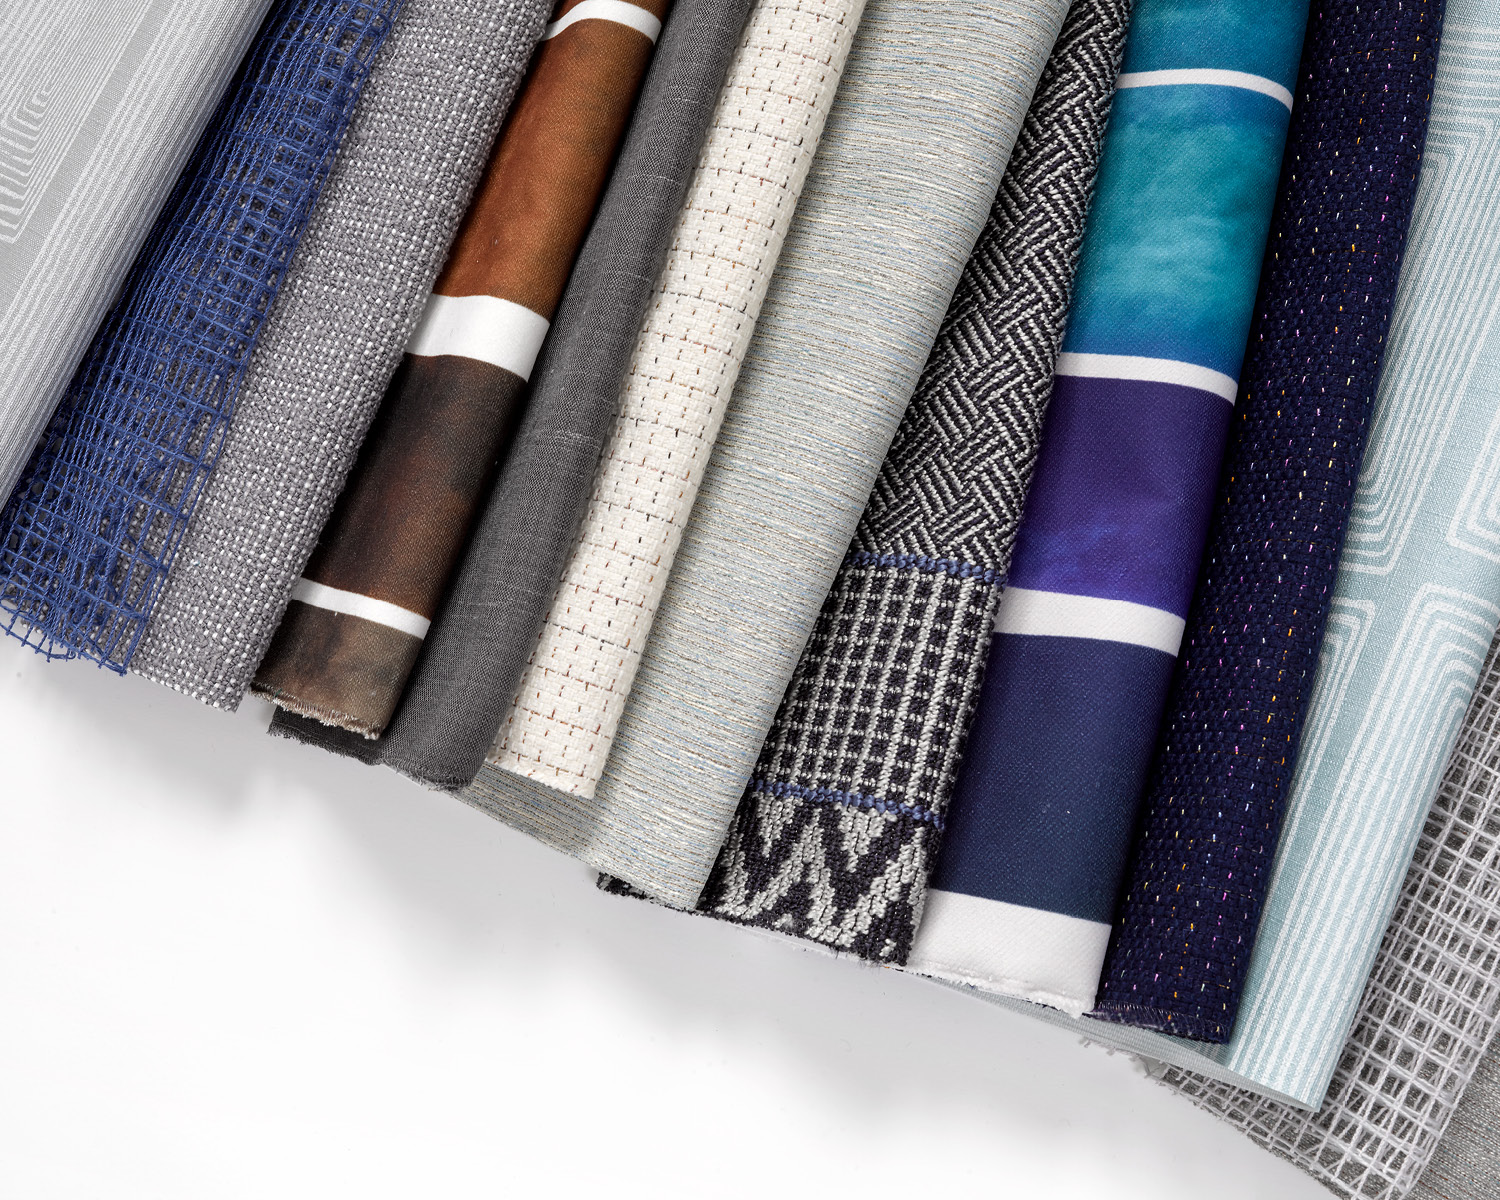 KnollTextiles Heritage Collection 